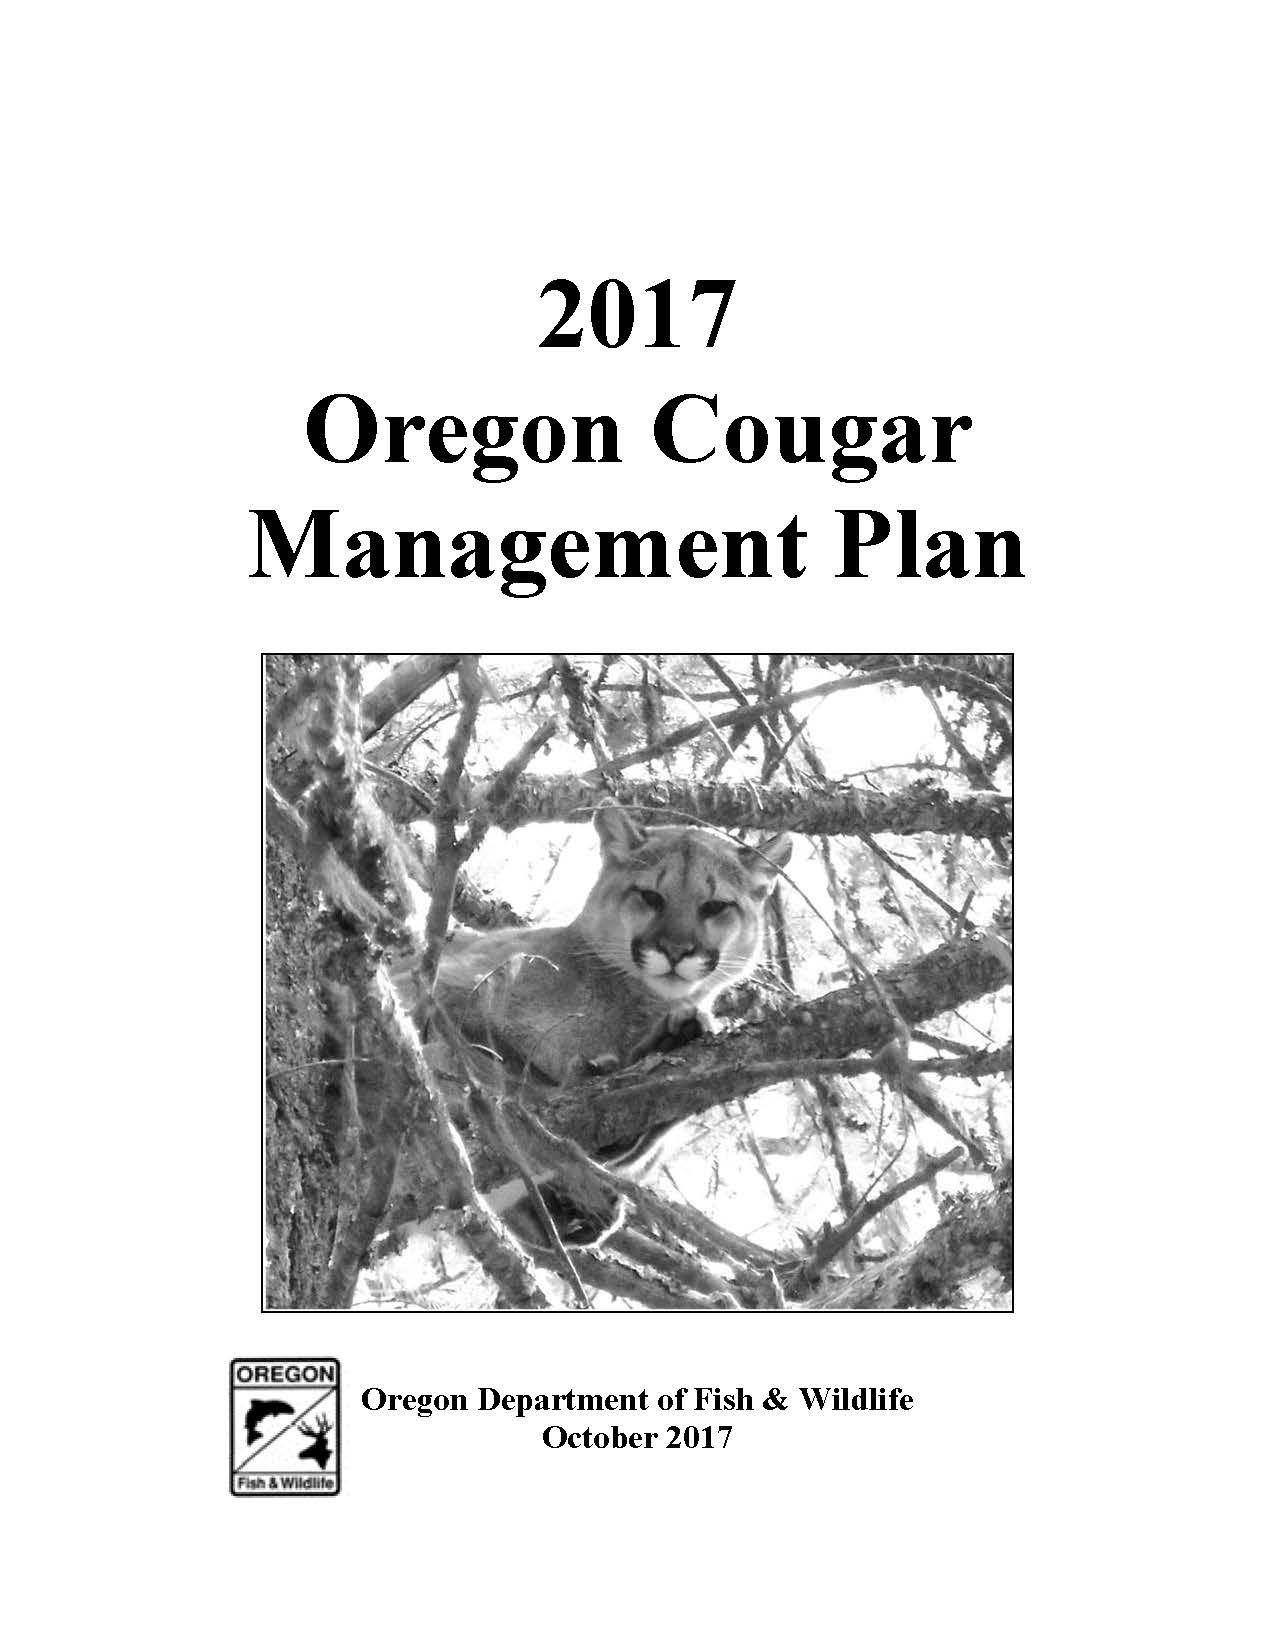 Oregon Department of Fish and Wildlife Logo - Oregon cougar management plan, by the Oregon Department of Fish